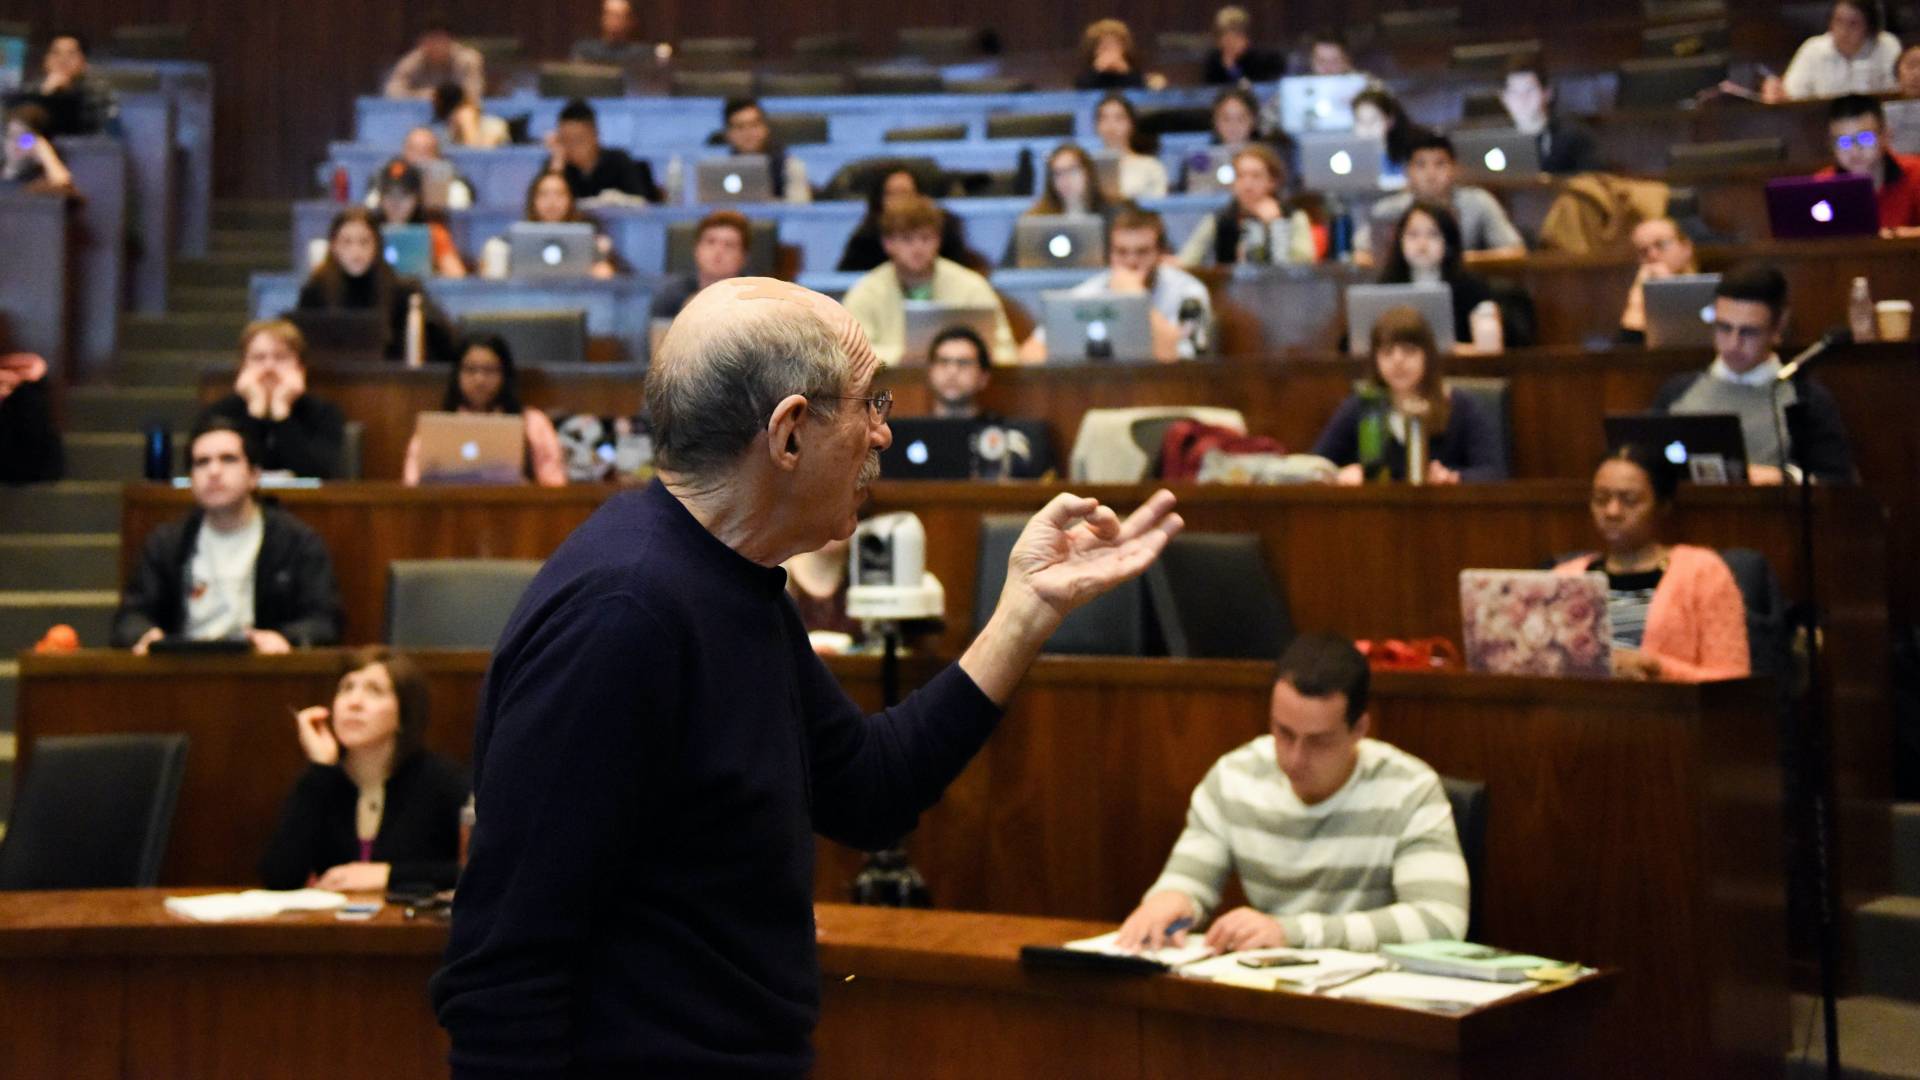 Professor Michael Oppenheimer speaking in large, tiered lecture hall